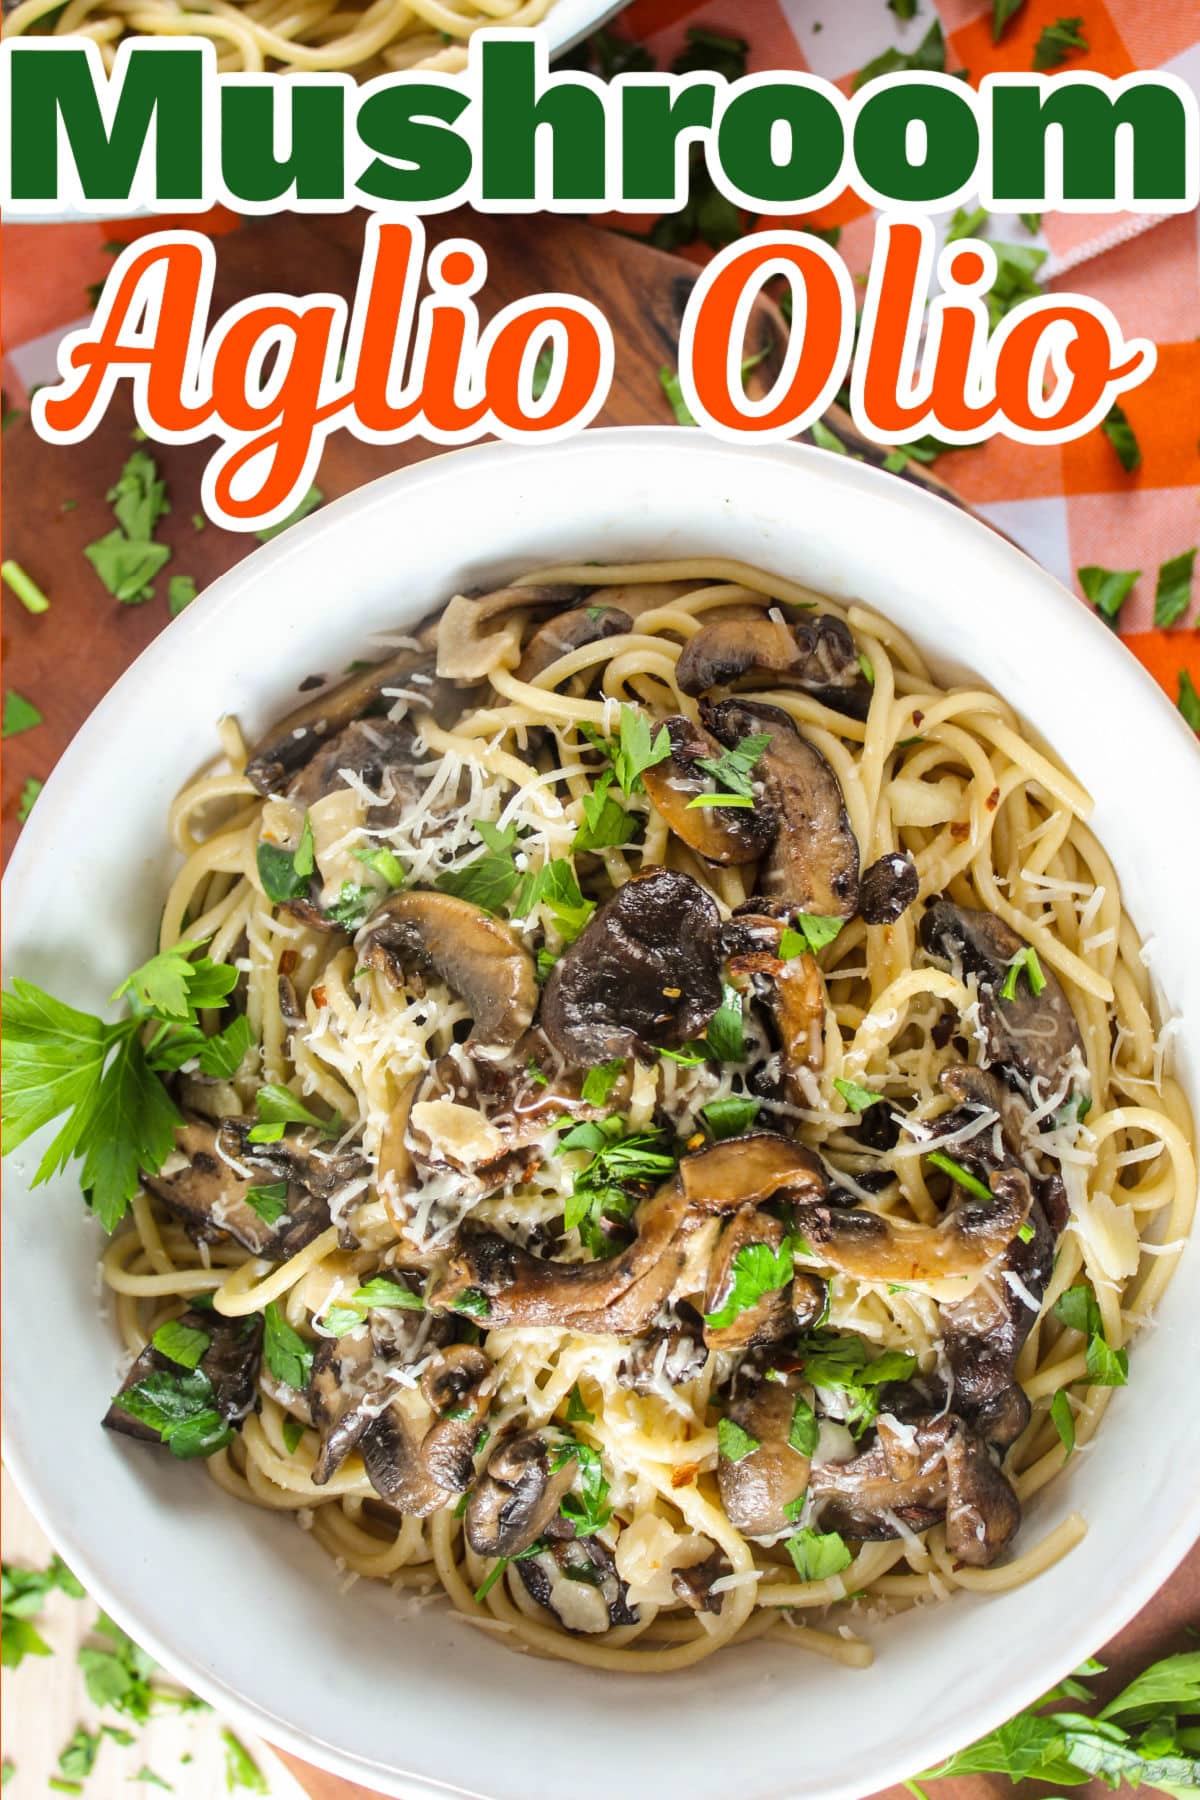 Mushroom Aglio Olio is a delicious dinner you can have on the table in just 15 minutes! It's a great meal for those meatless weeknights or just any night you're looking for something light and simple! via @foodhussy